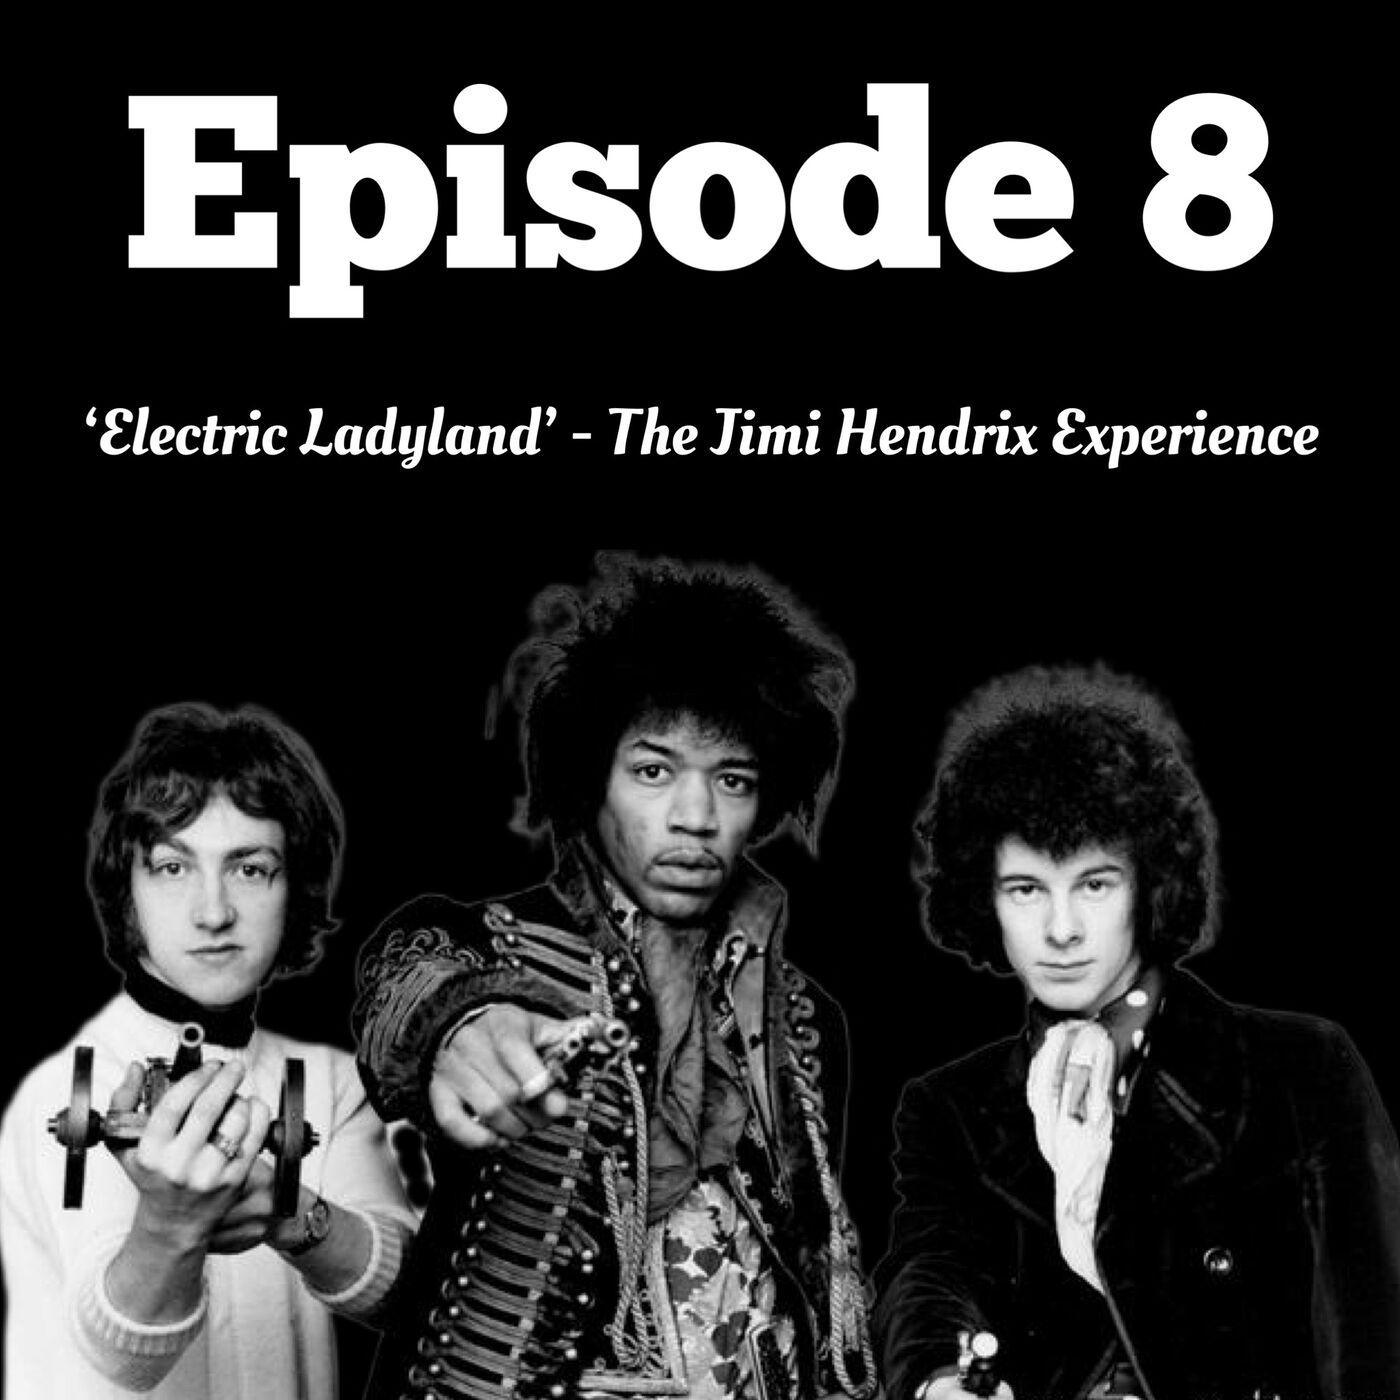 8. ’Electric Ladyland’ - The Jimi Hendrix Experience (1968)